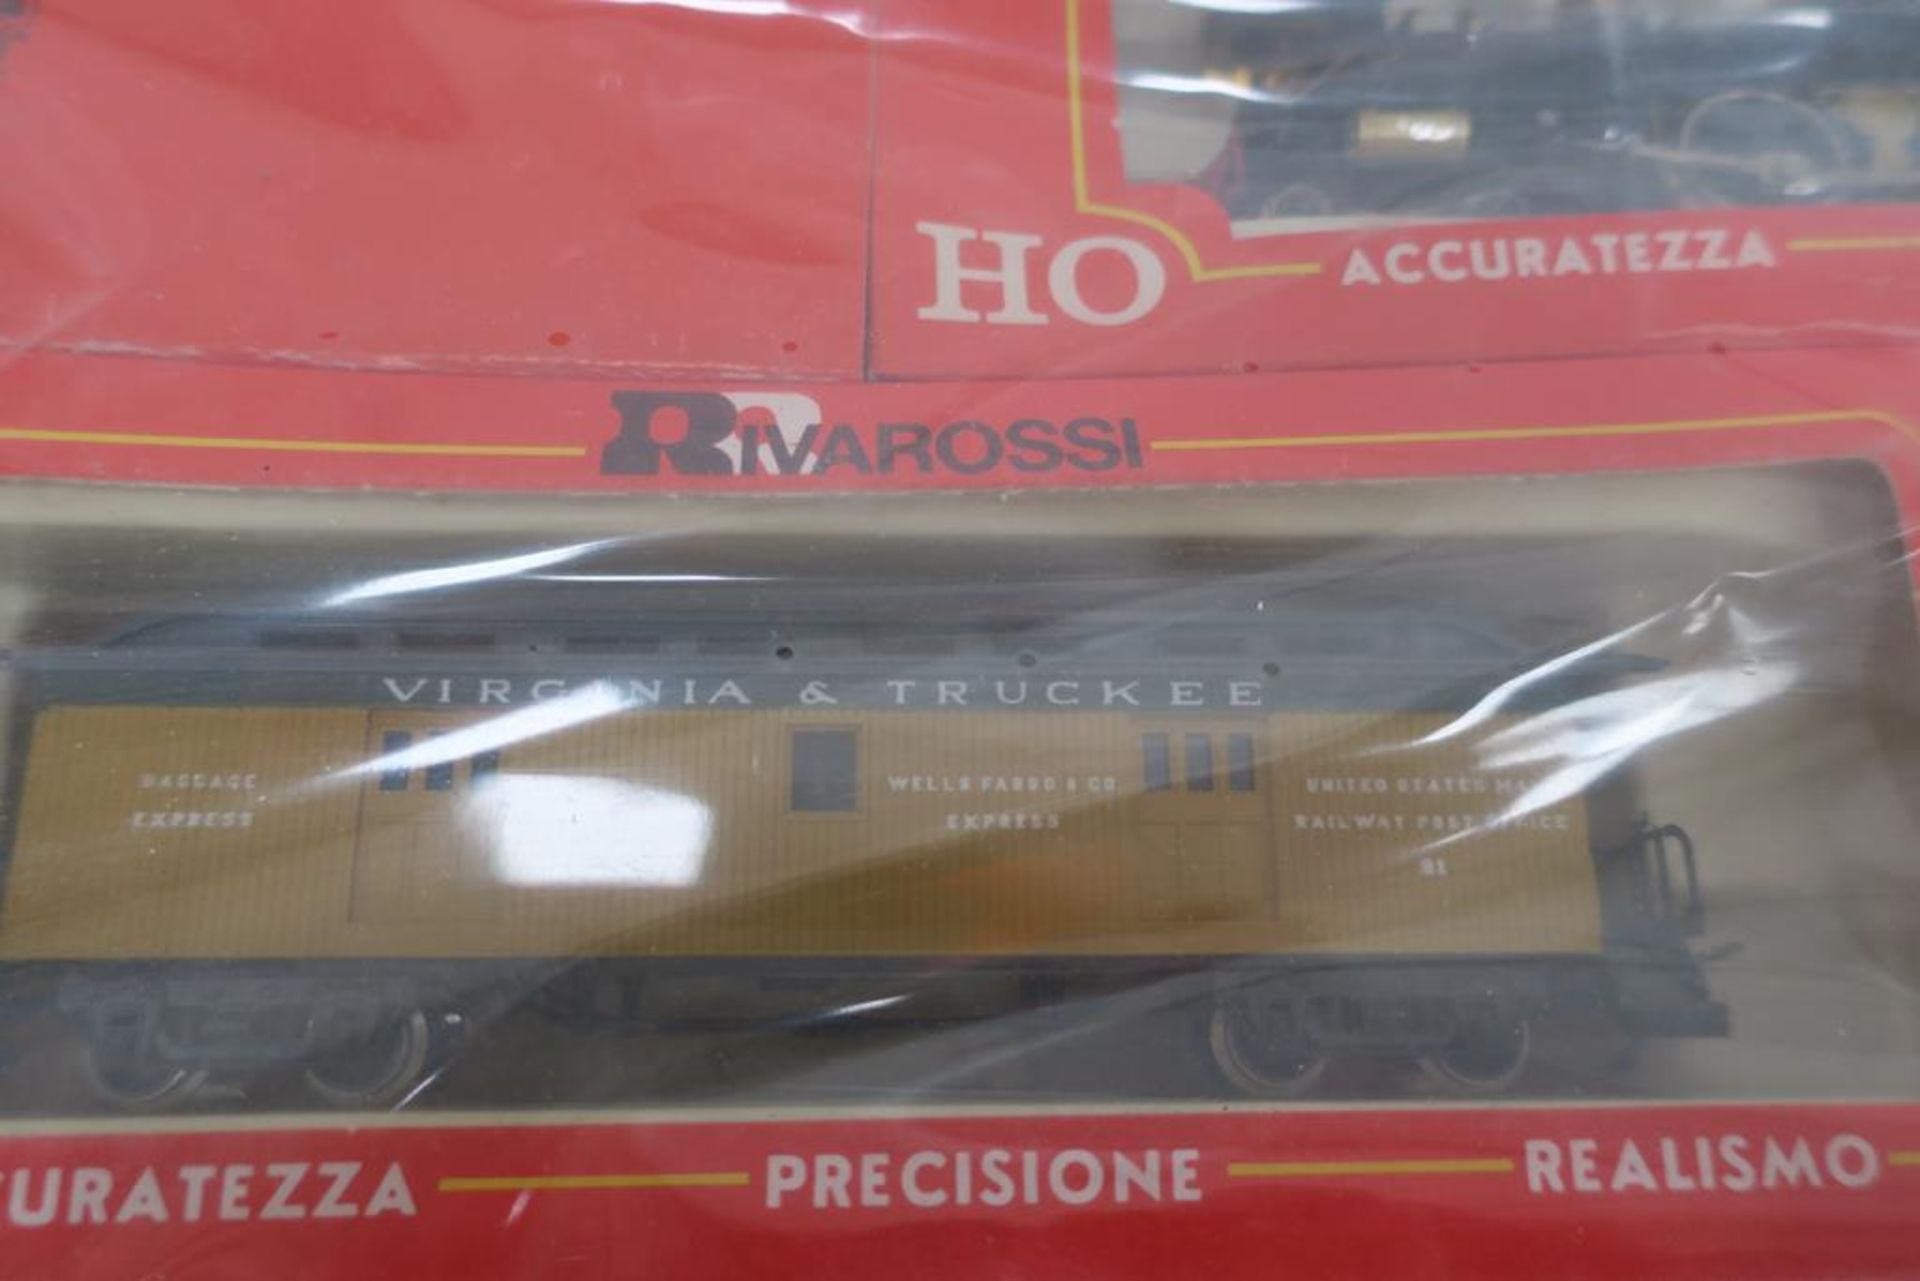 Rivarossi 224- Afternoon Express Train Set - Image 3 of 9